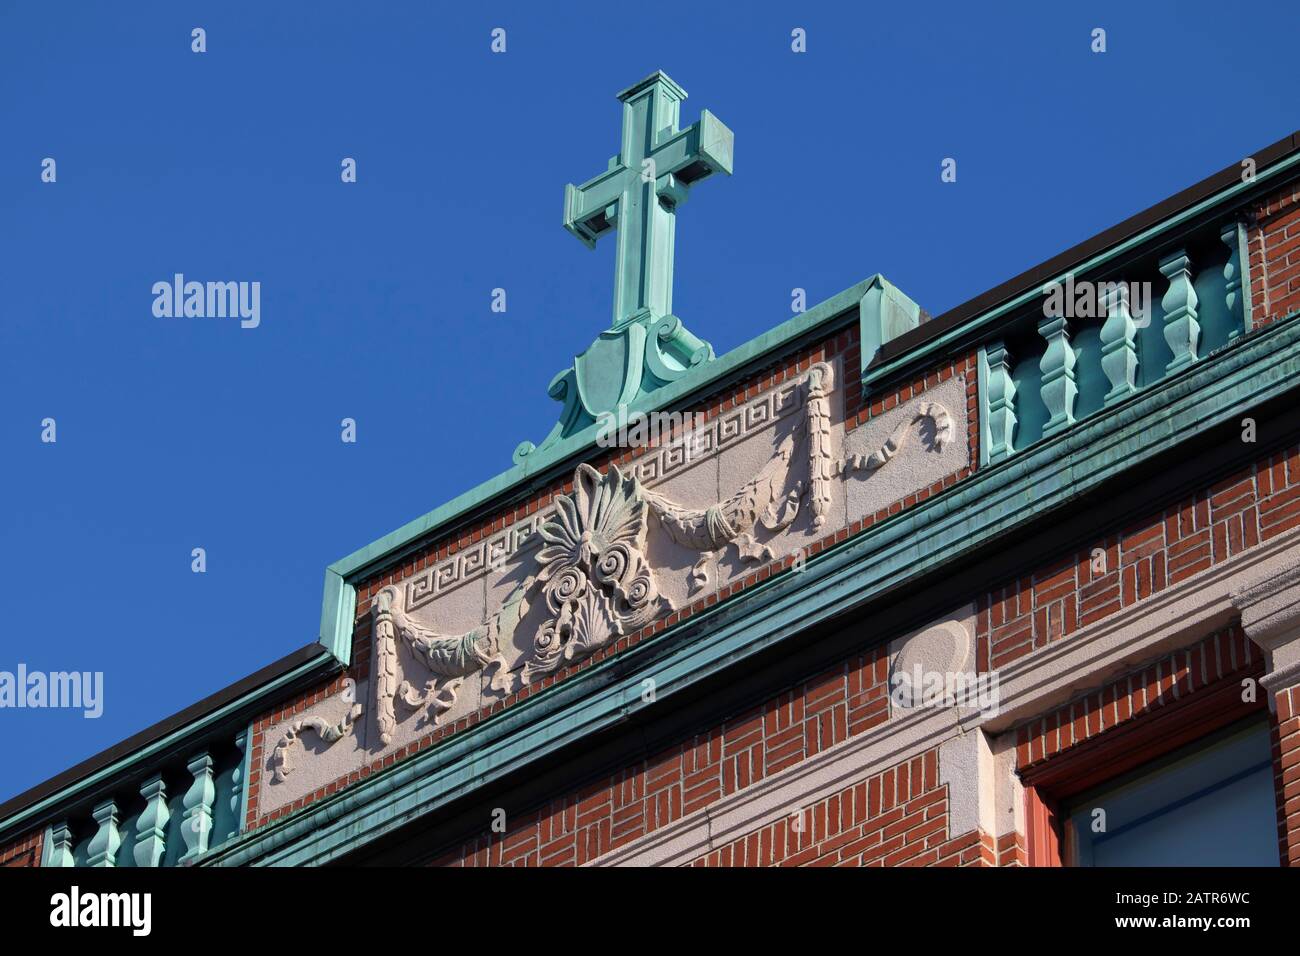 Roof top with oxidized green copper decorative cross and ornament, front facade building, side view, Rosemont, Montreal, Quebec, Canada Stock Photo